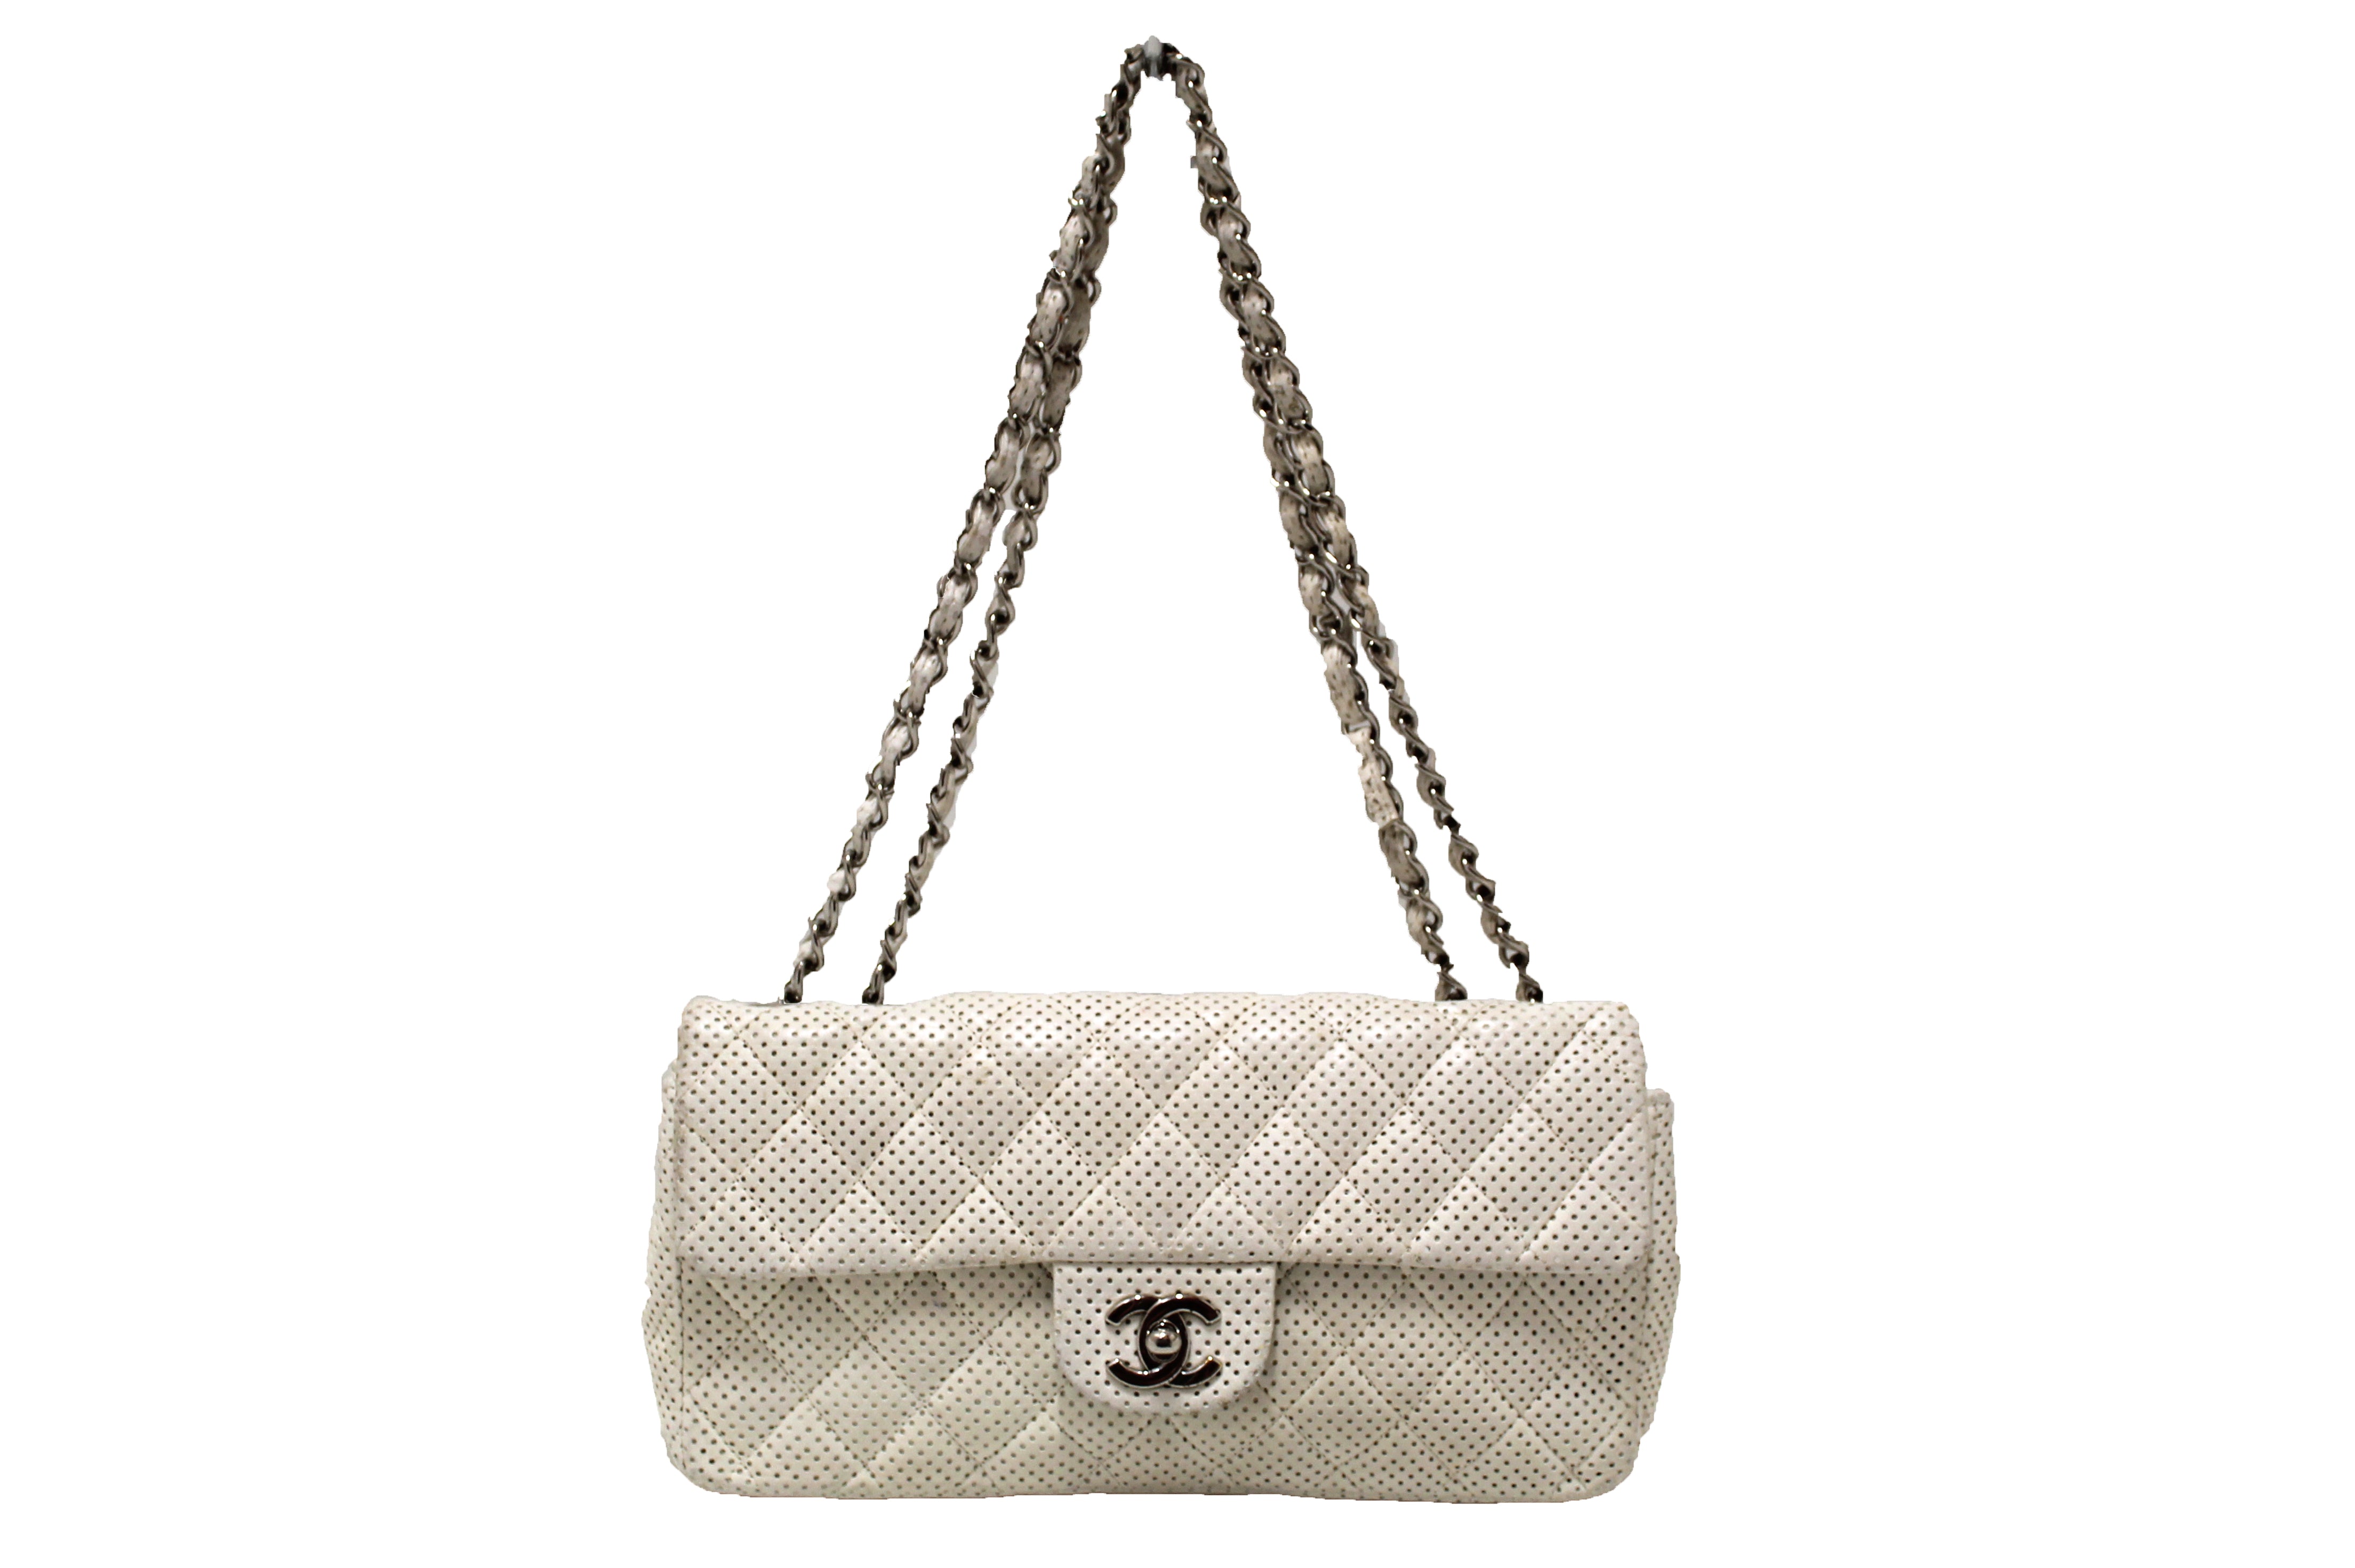 Authentic Chanel Quilted Perforated White Lambskin East West Flap